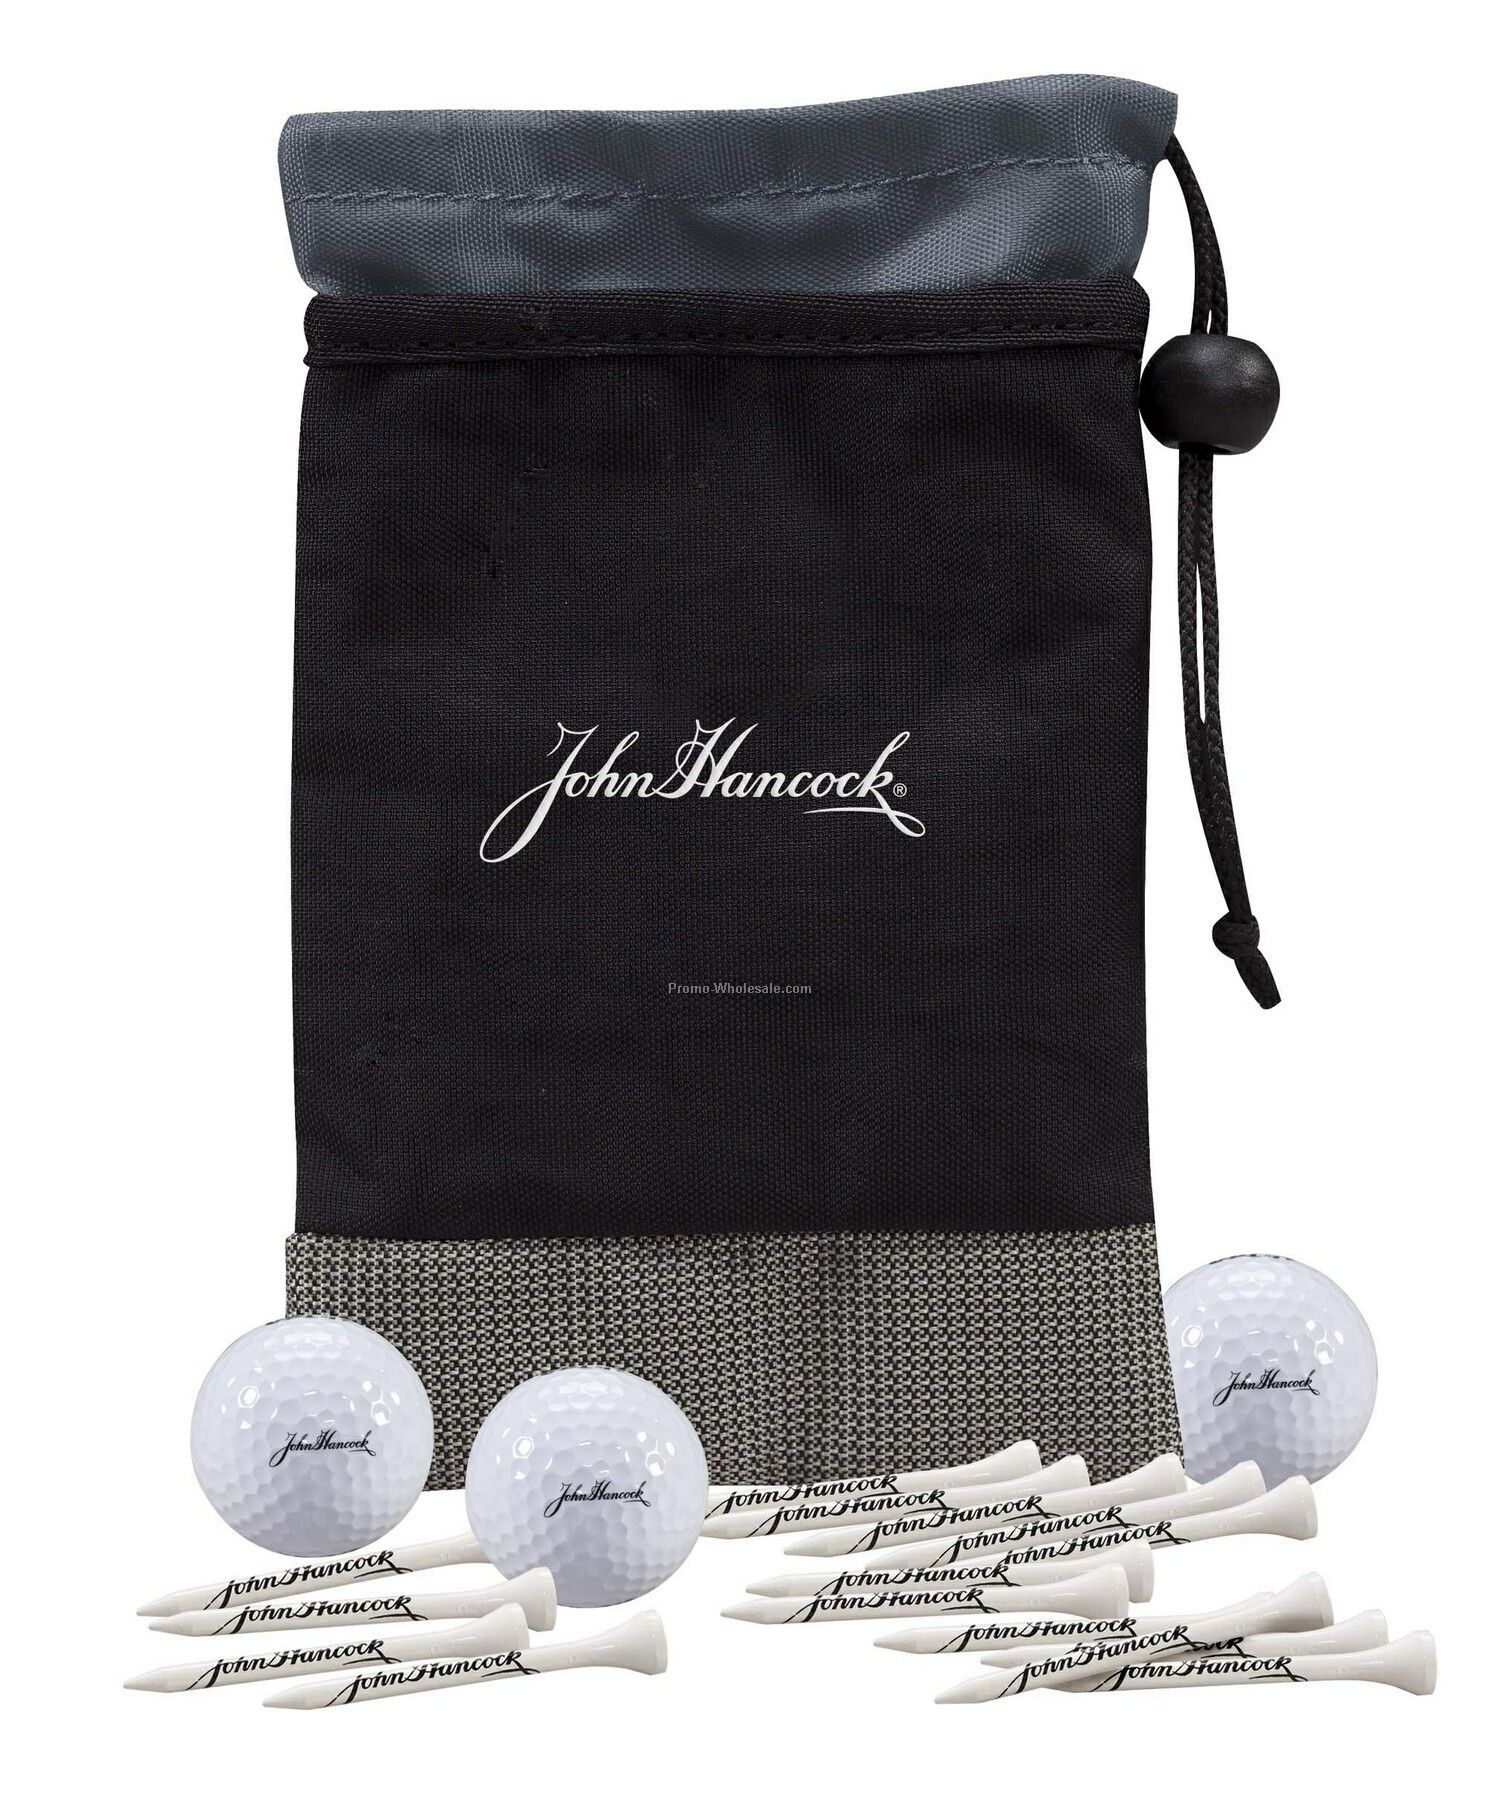 Tee Off Monterey W/Noodle Soft Event Kit